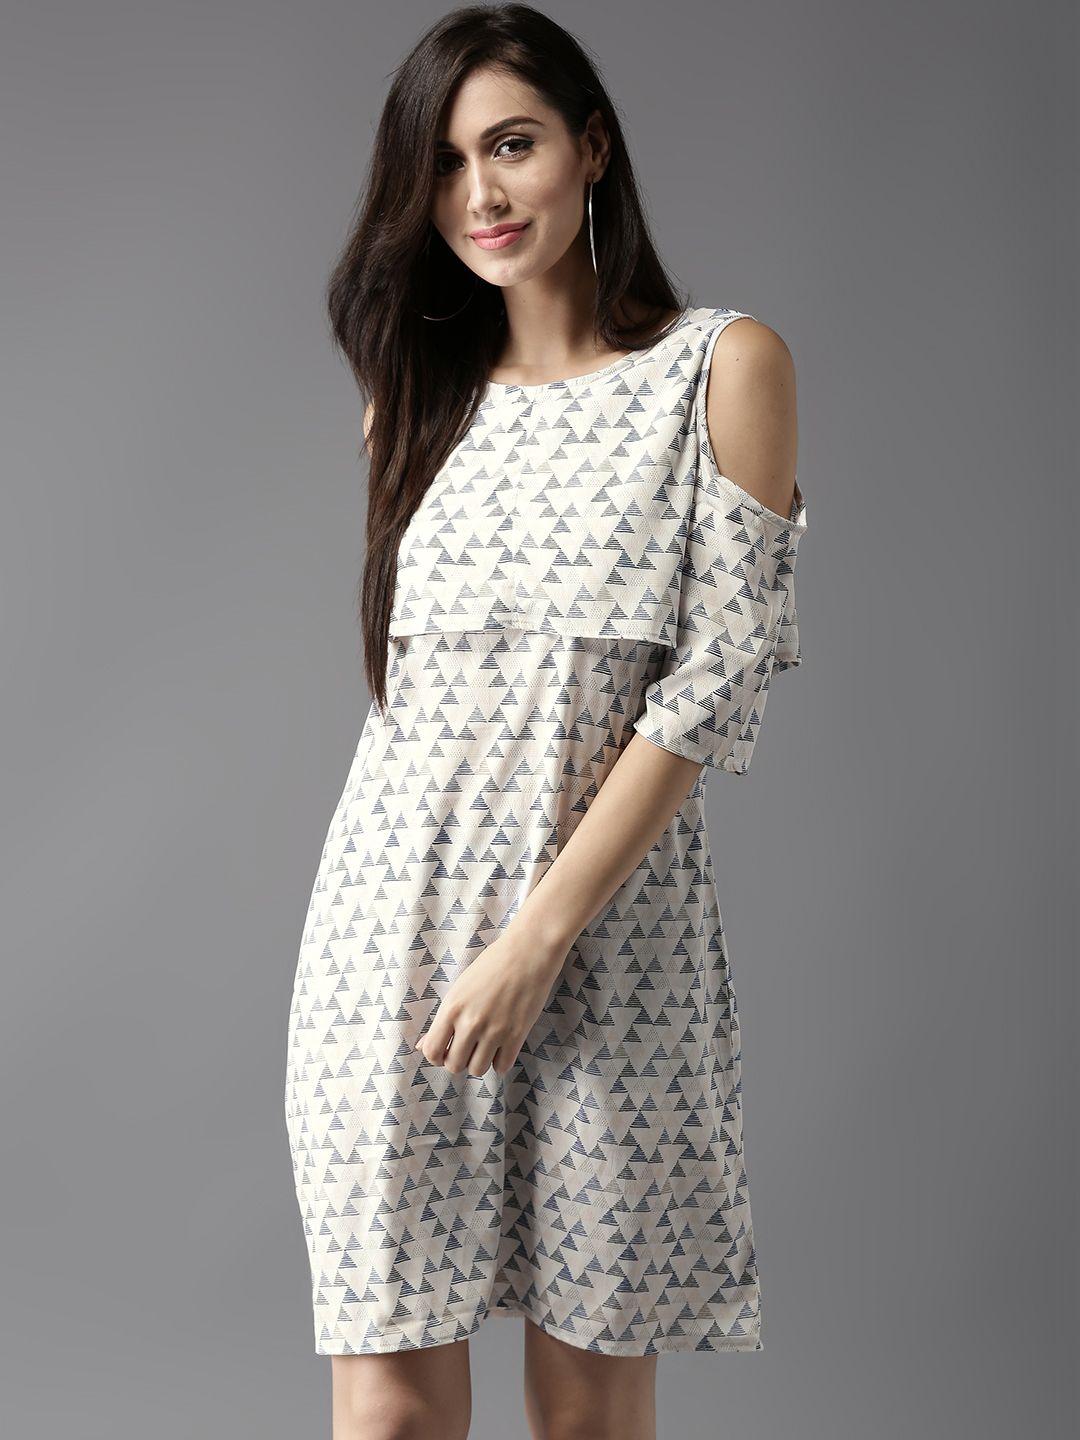 here&now women off-white & navy printed layered shift dress